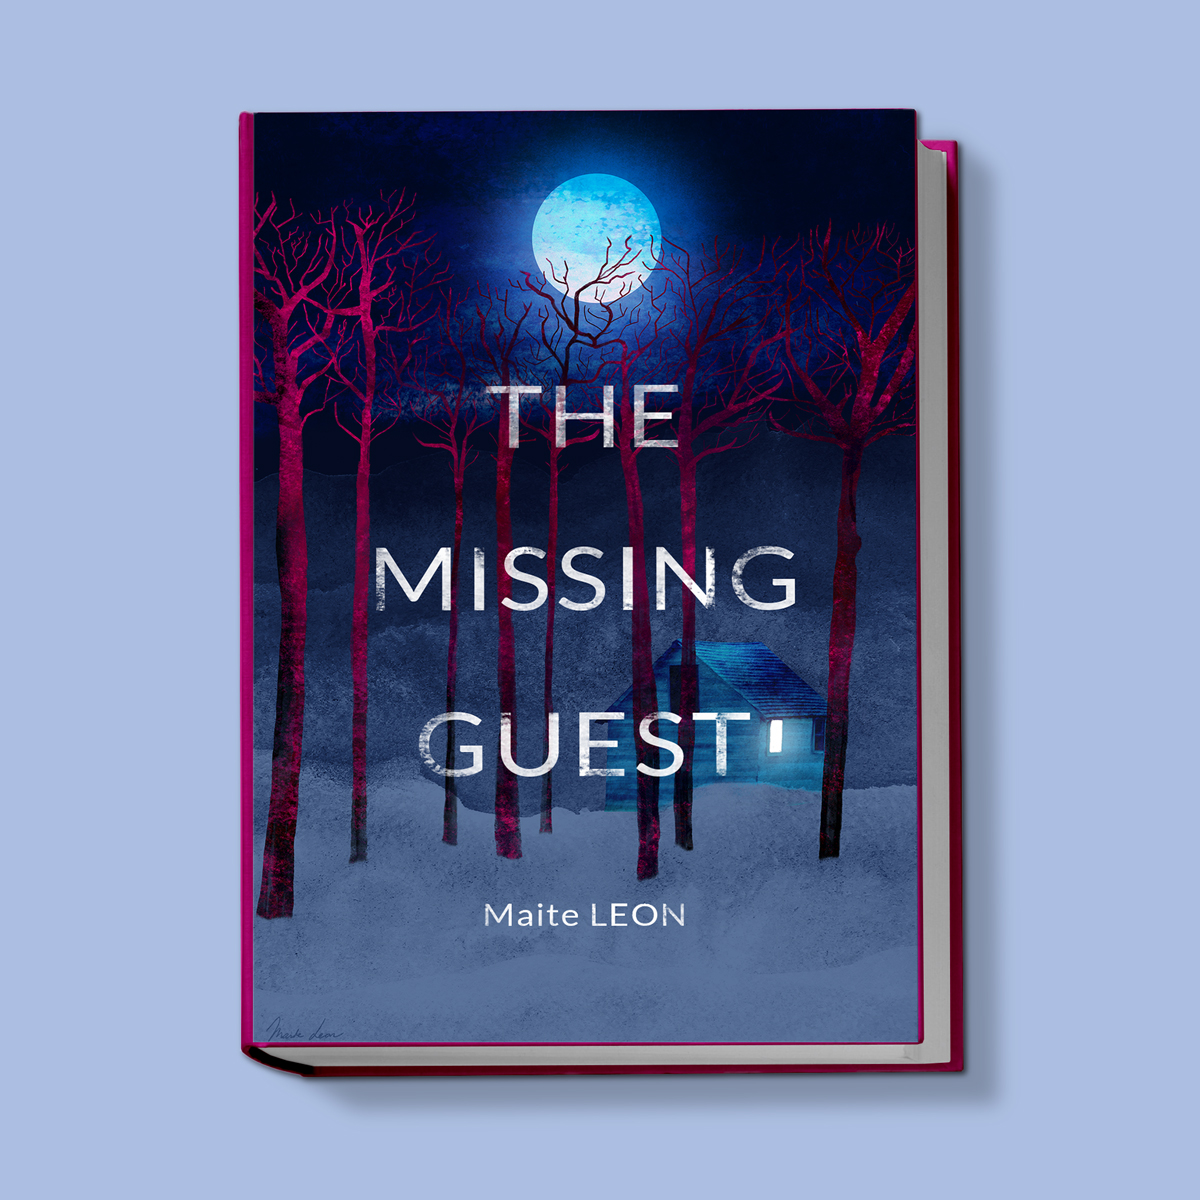 THE-MISSING-GUEST-MAITE-LEON-BOOK COVER